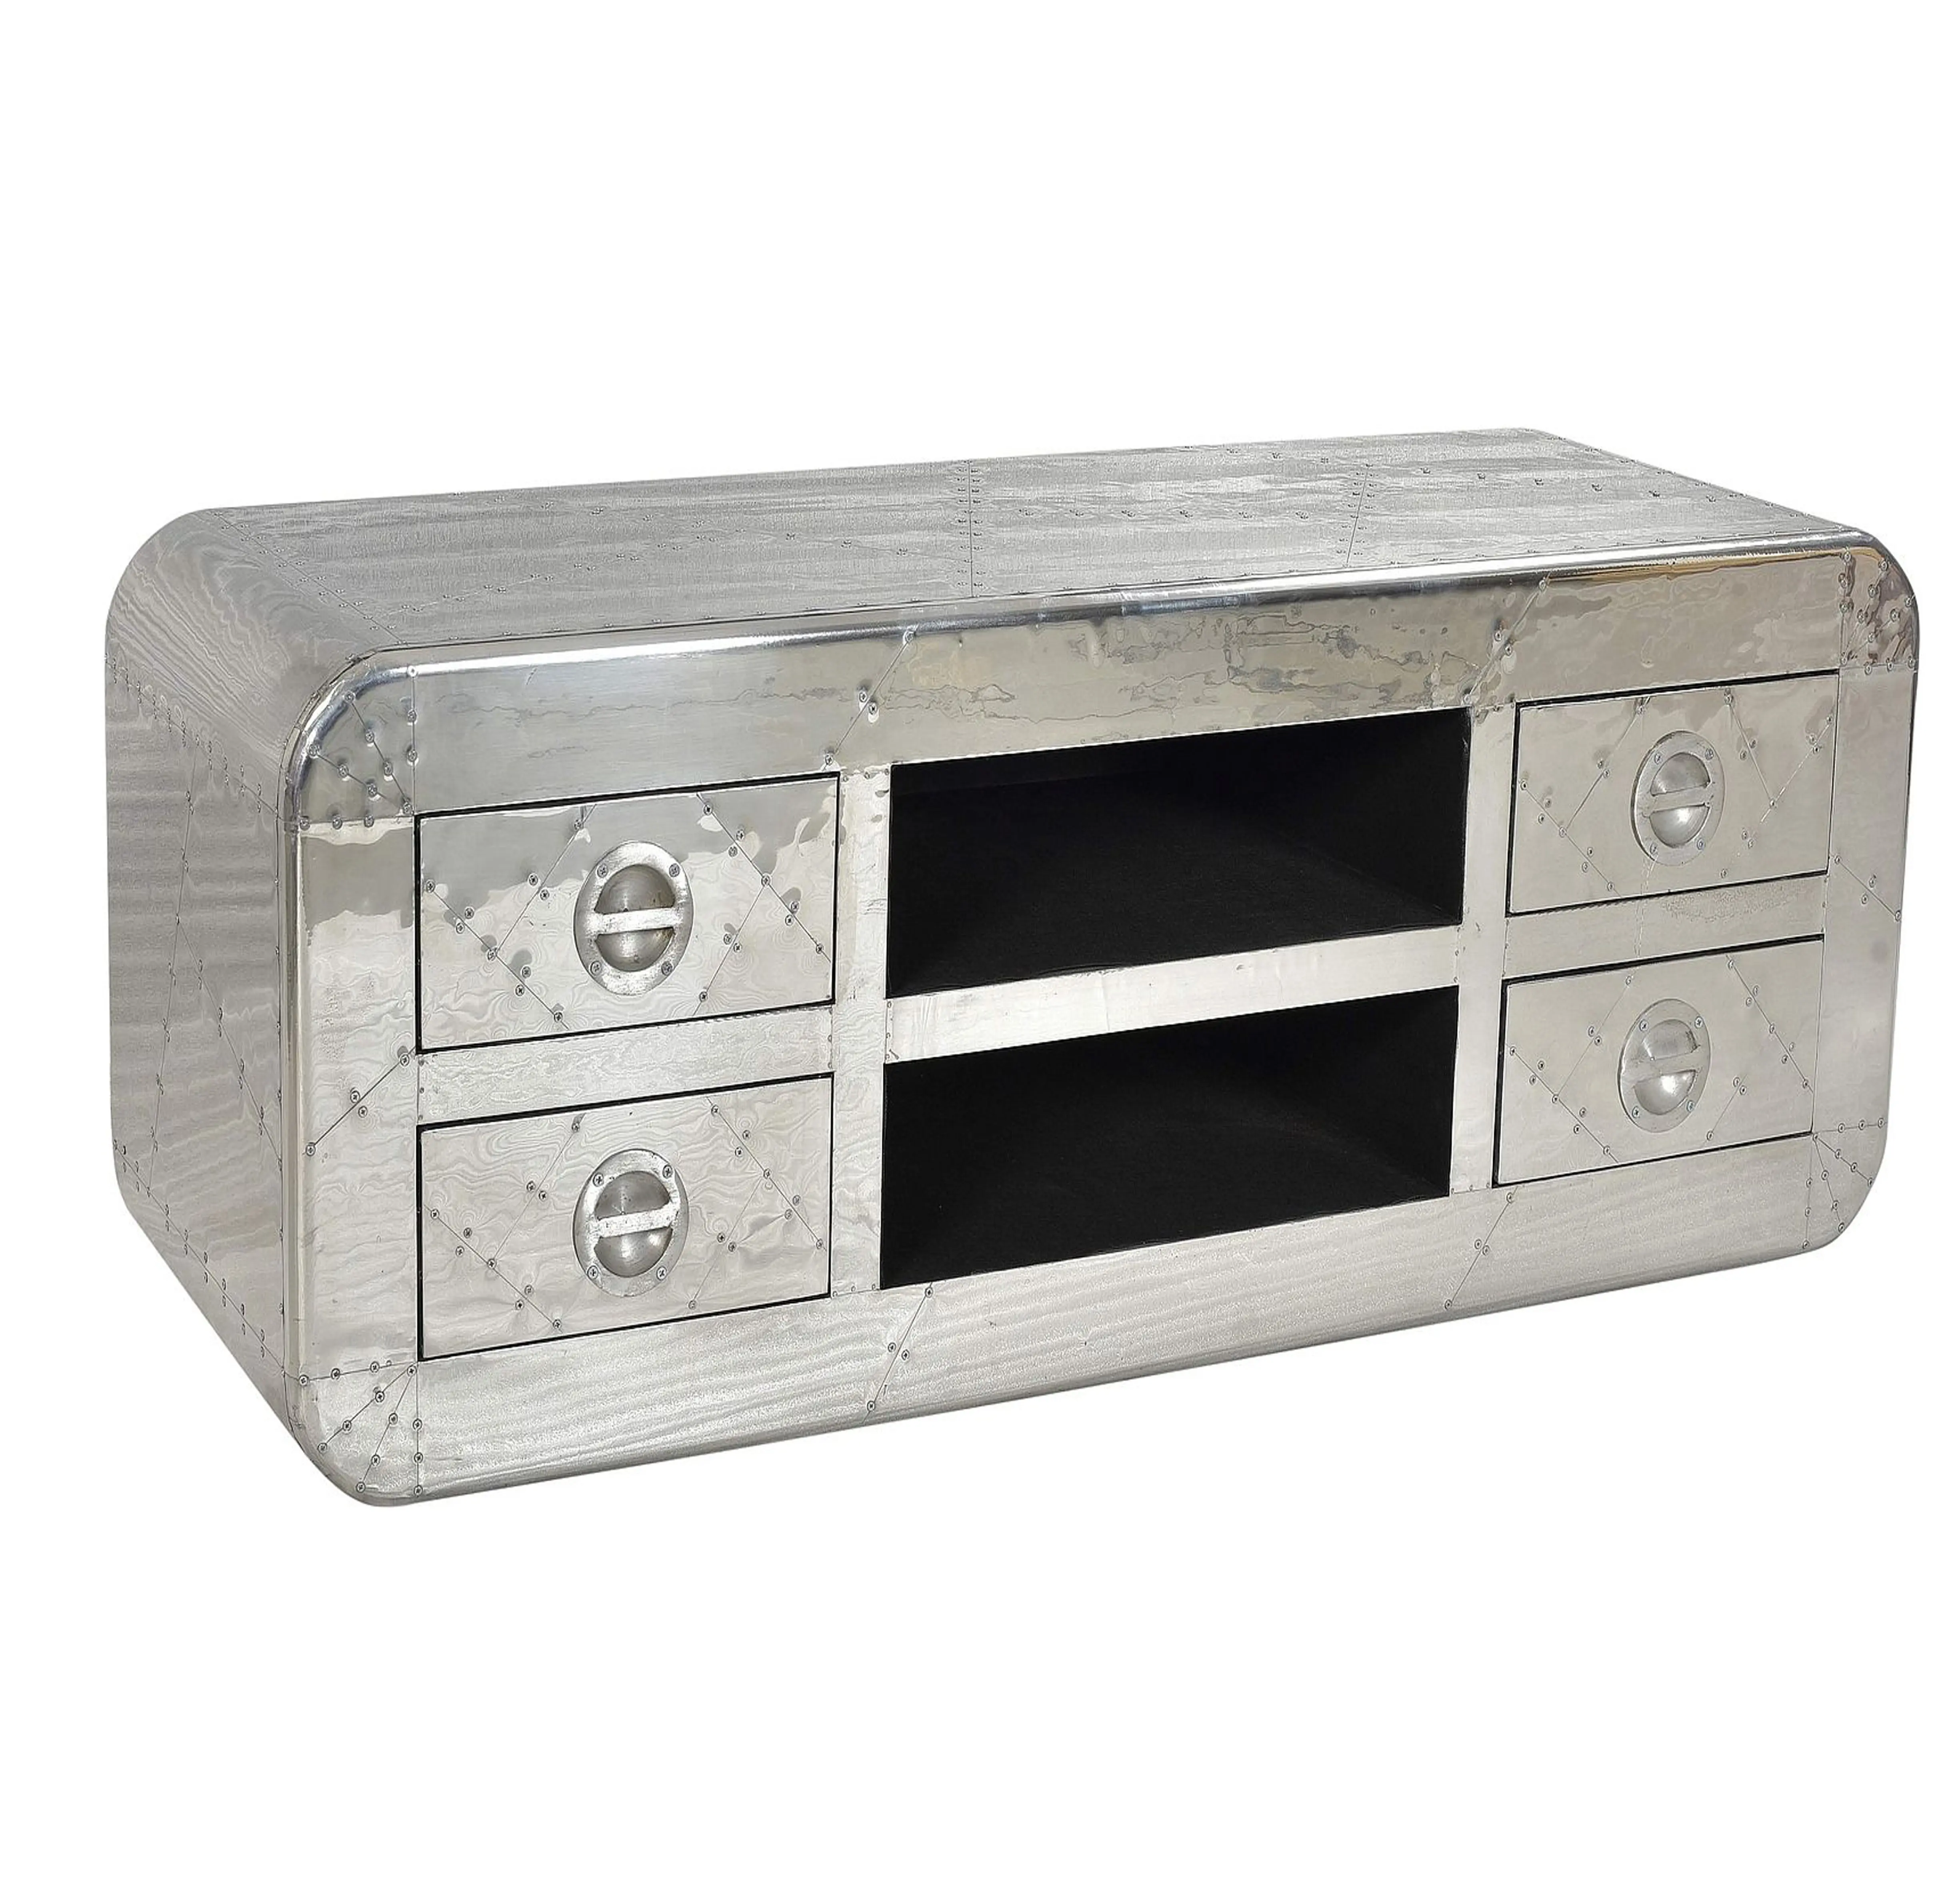 Aviator TV Stand Metal Aluminium Furniture Vintage Industrial Style Low Board Sideboard Aircraft Media Storage Cabinet